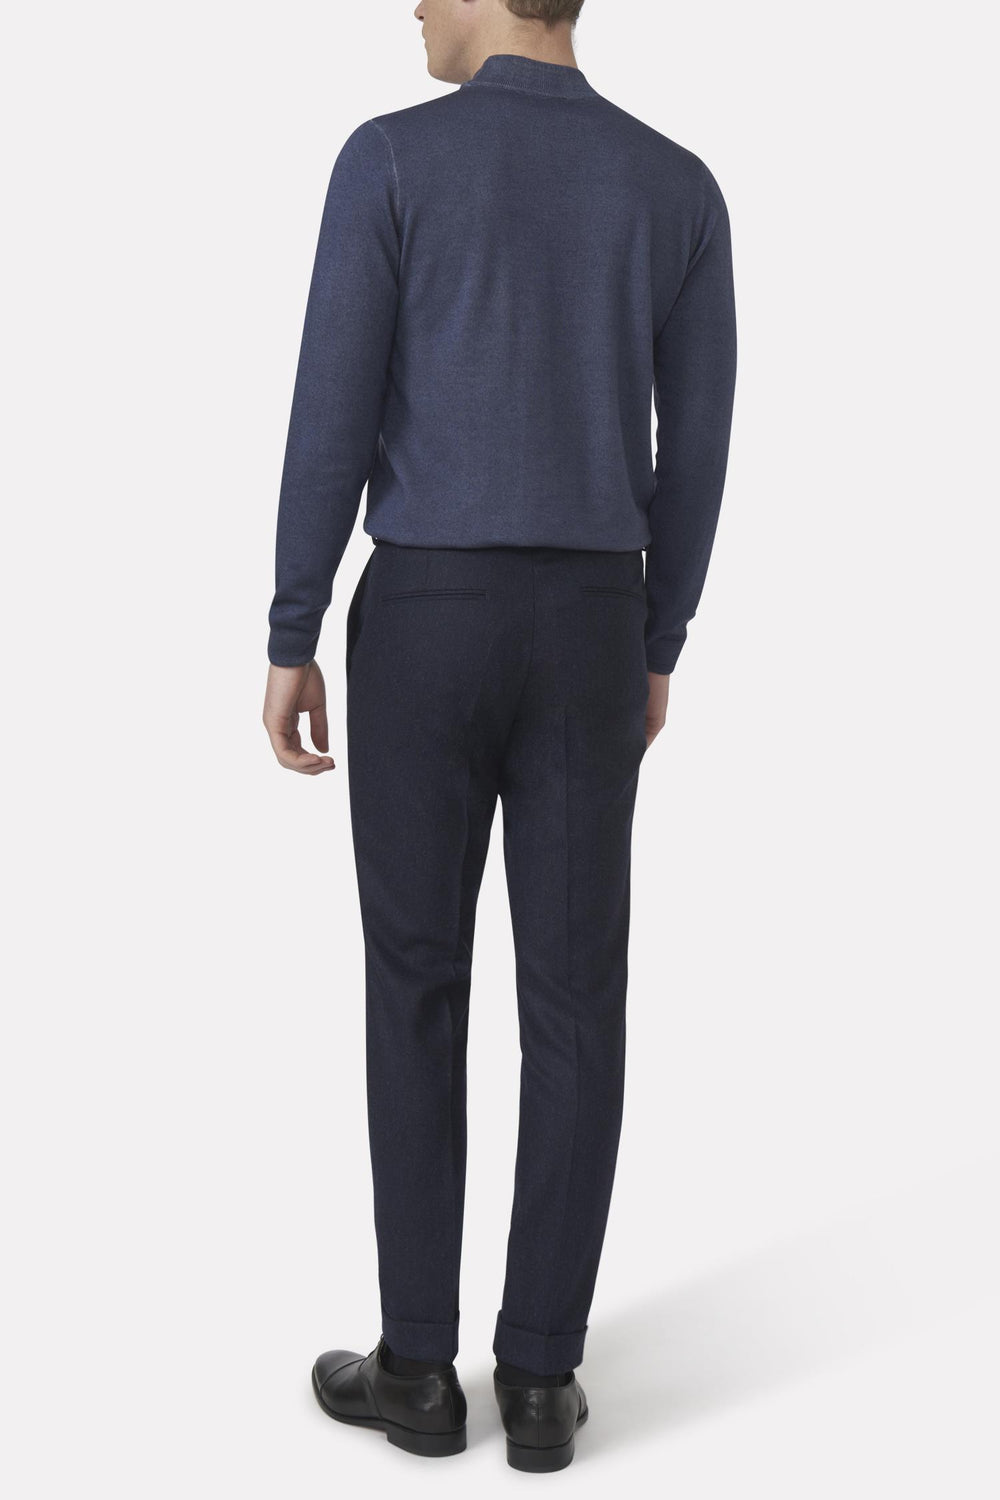 OSCAR JACOBSON - DENZ TURN UP TROUSERS - Dale